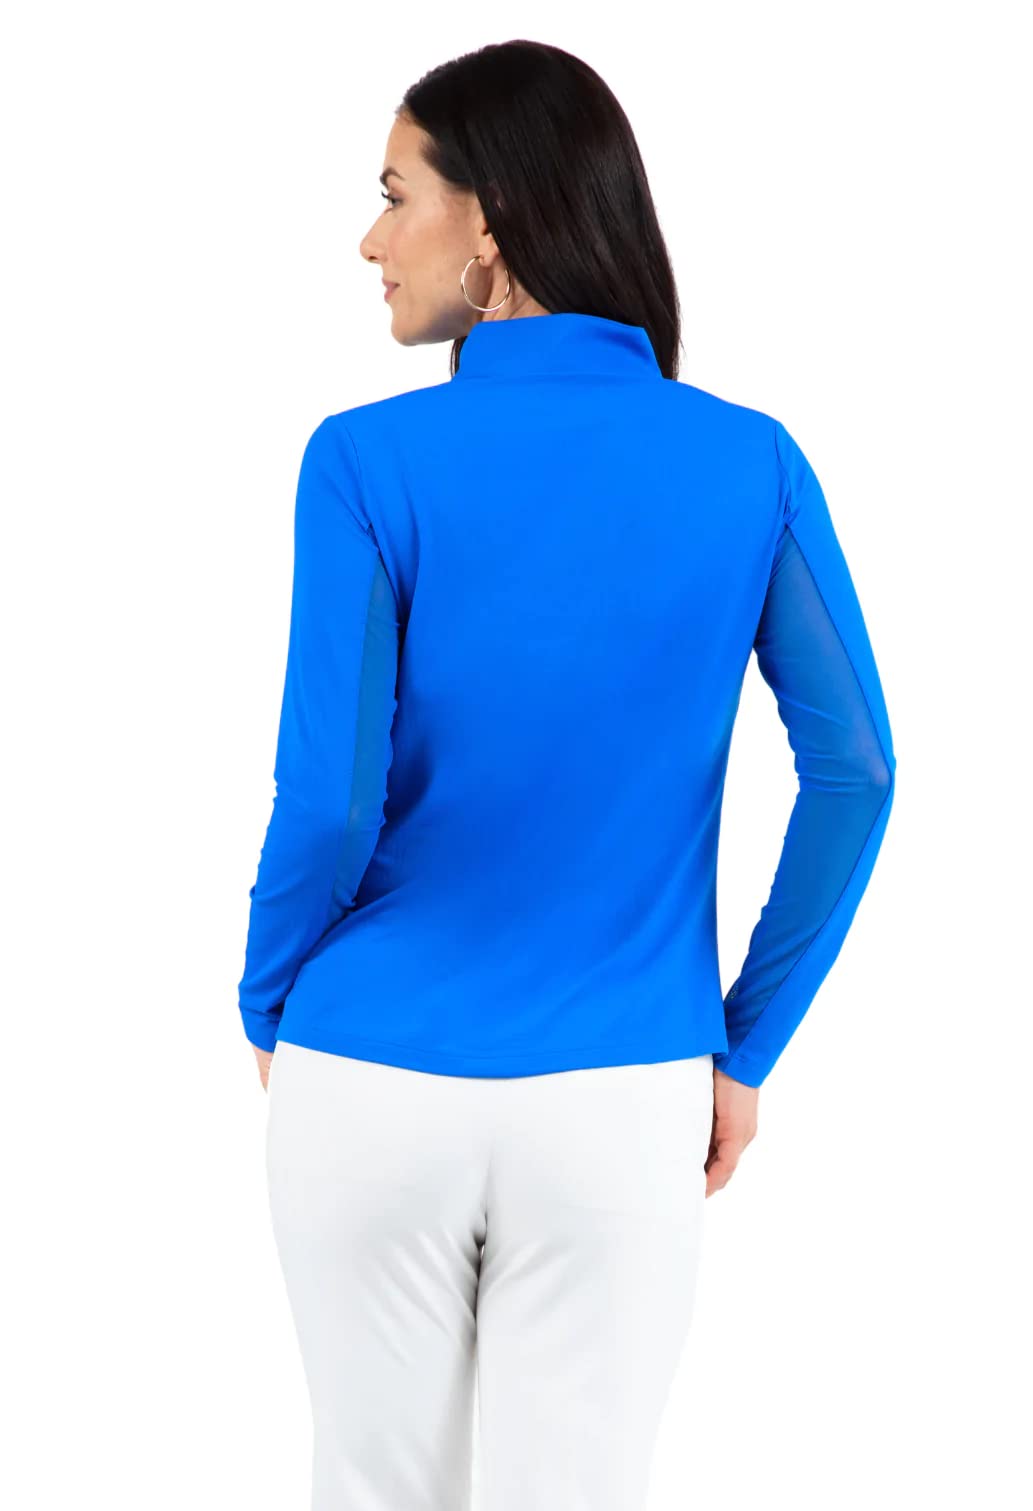 IBKUL Athleisure Wear Sun Protective UPF 50+ Icefil Cooling Tech Long Sleeve Mock Neck Top with Under Arm Mesh 80000 Blue Solid S